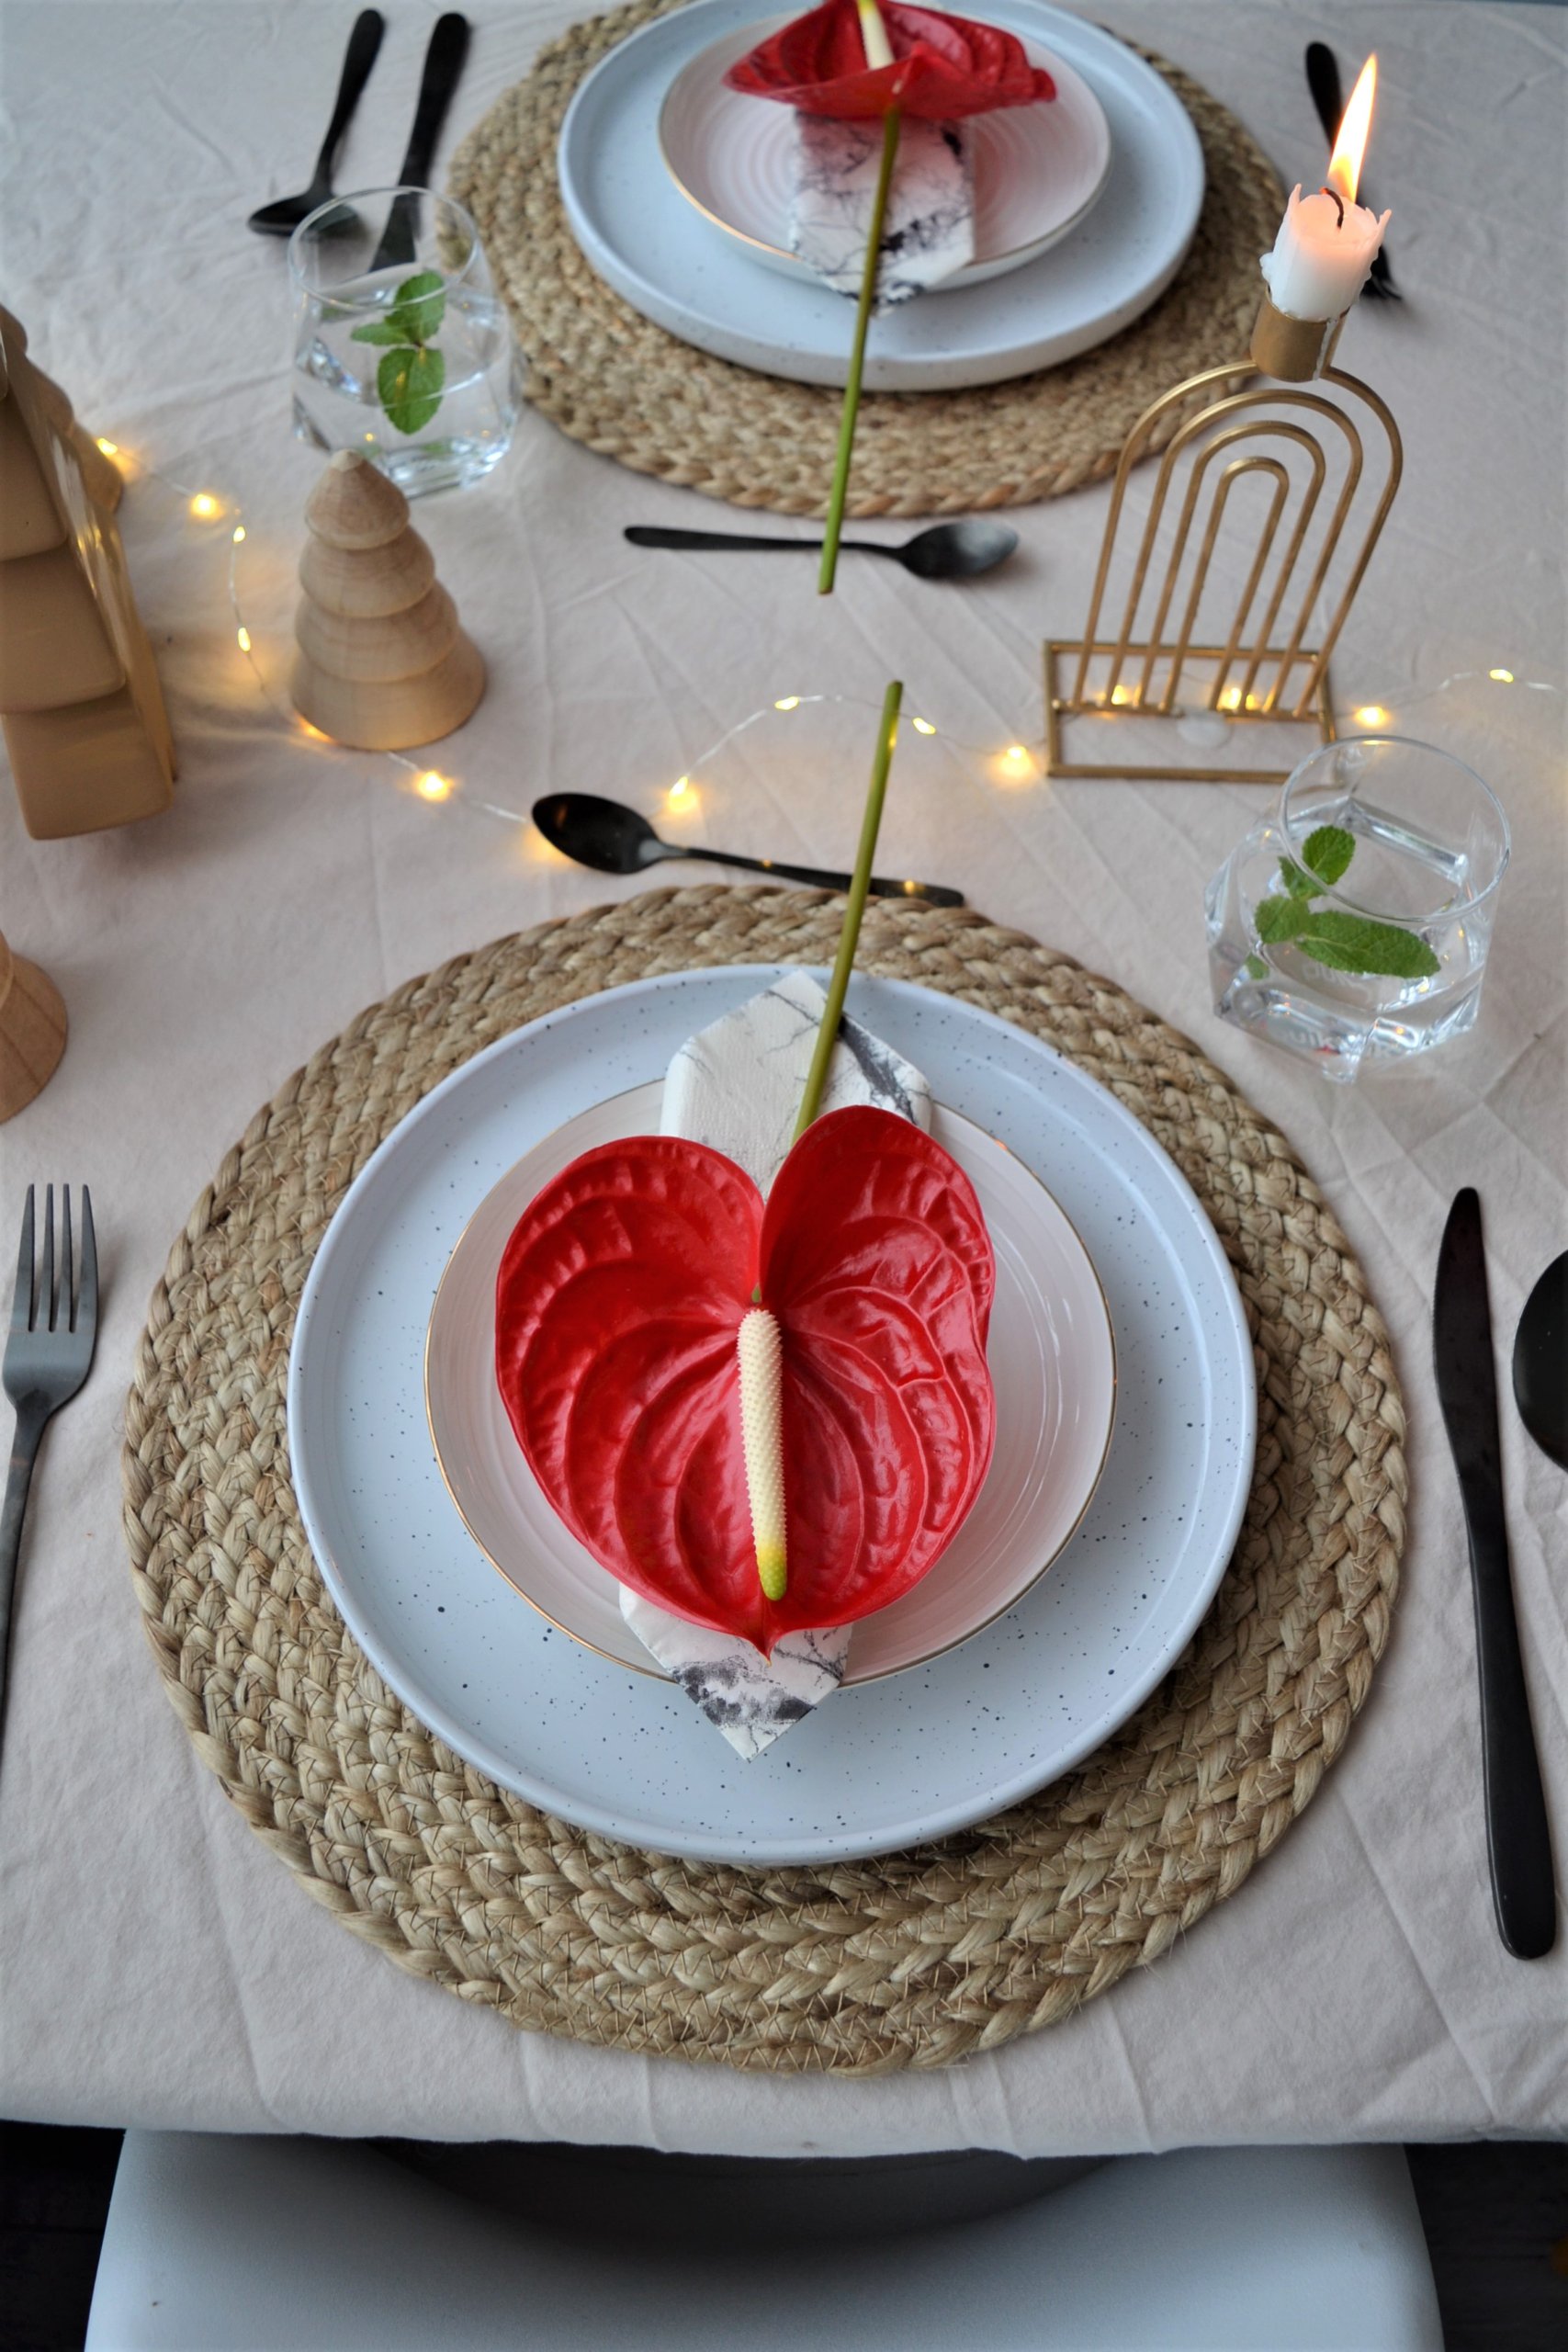 Christmas table setting with red Anthurium flowers